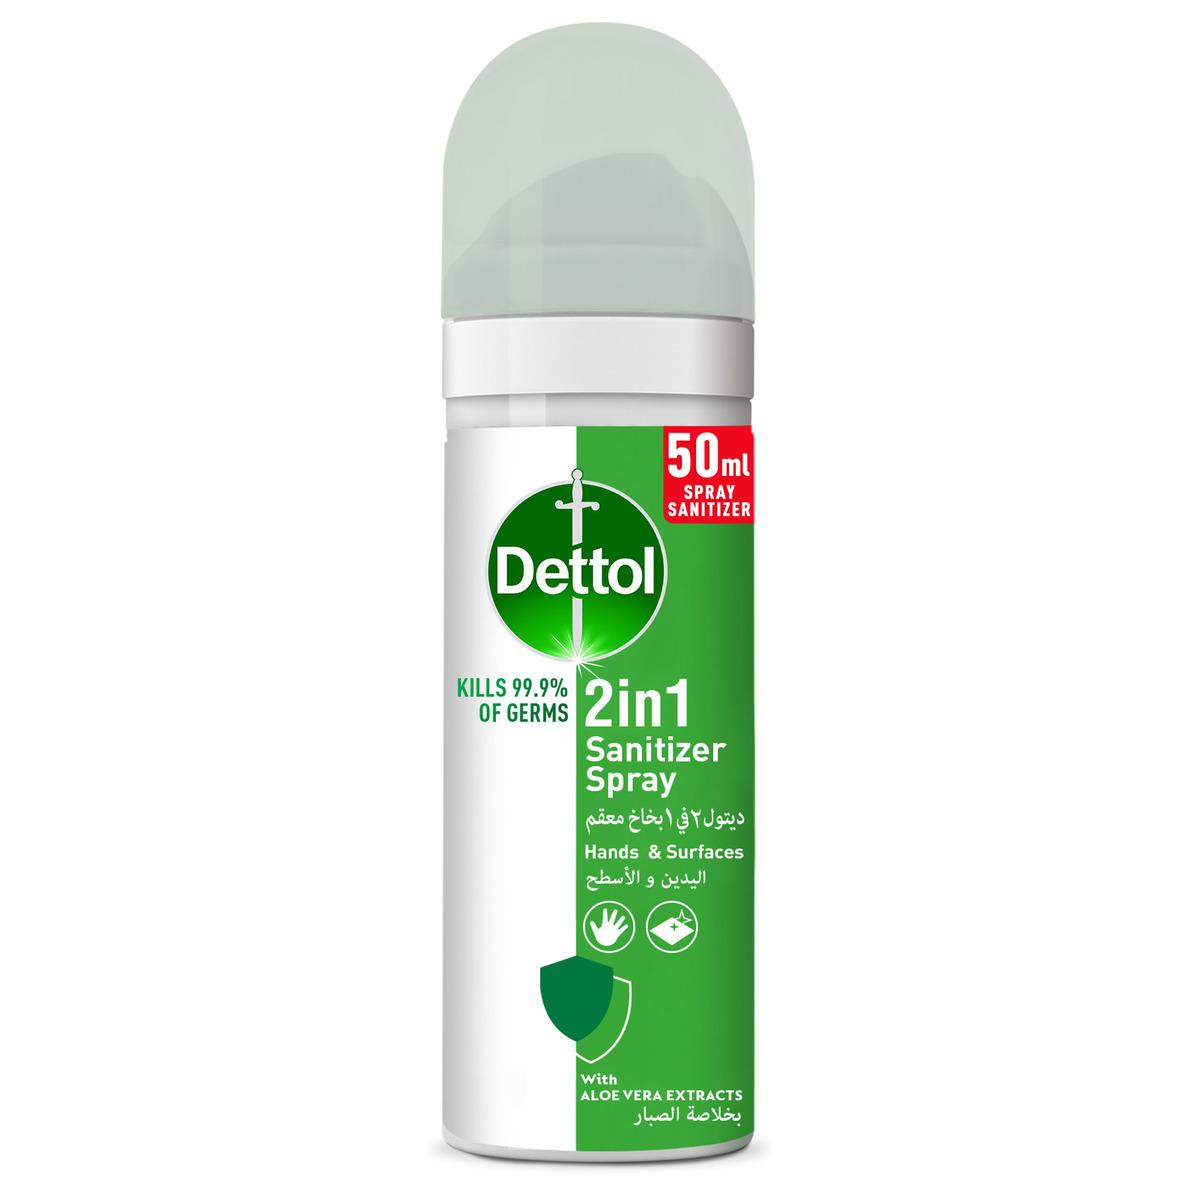 Dettol 2 In 1 Sanitizer Spray For Hands & Surfaces With Aloe Vera Extracts 50 ml